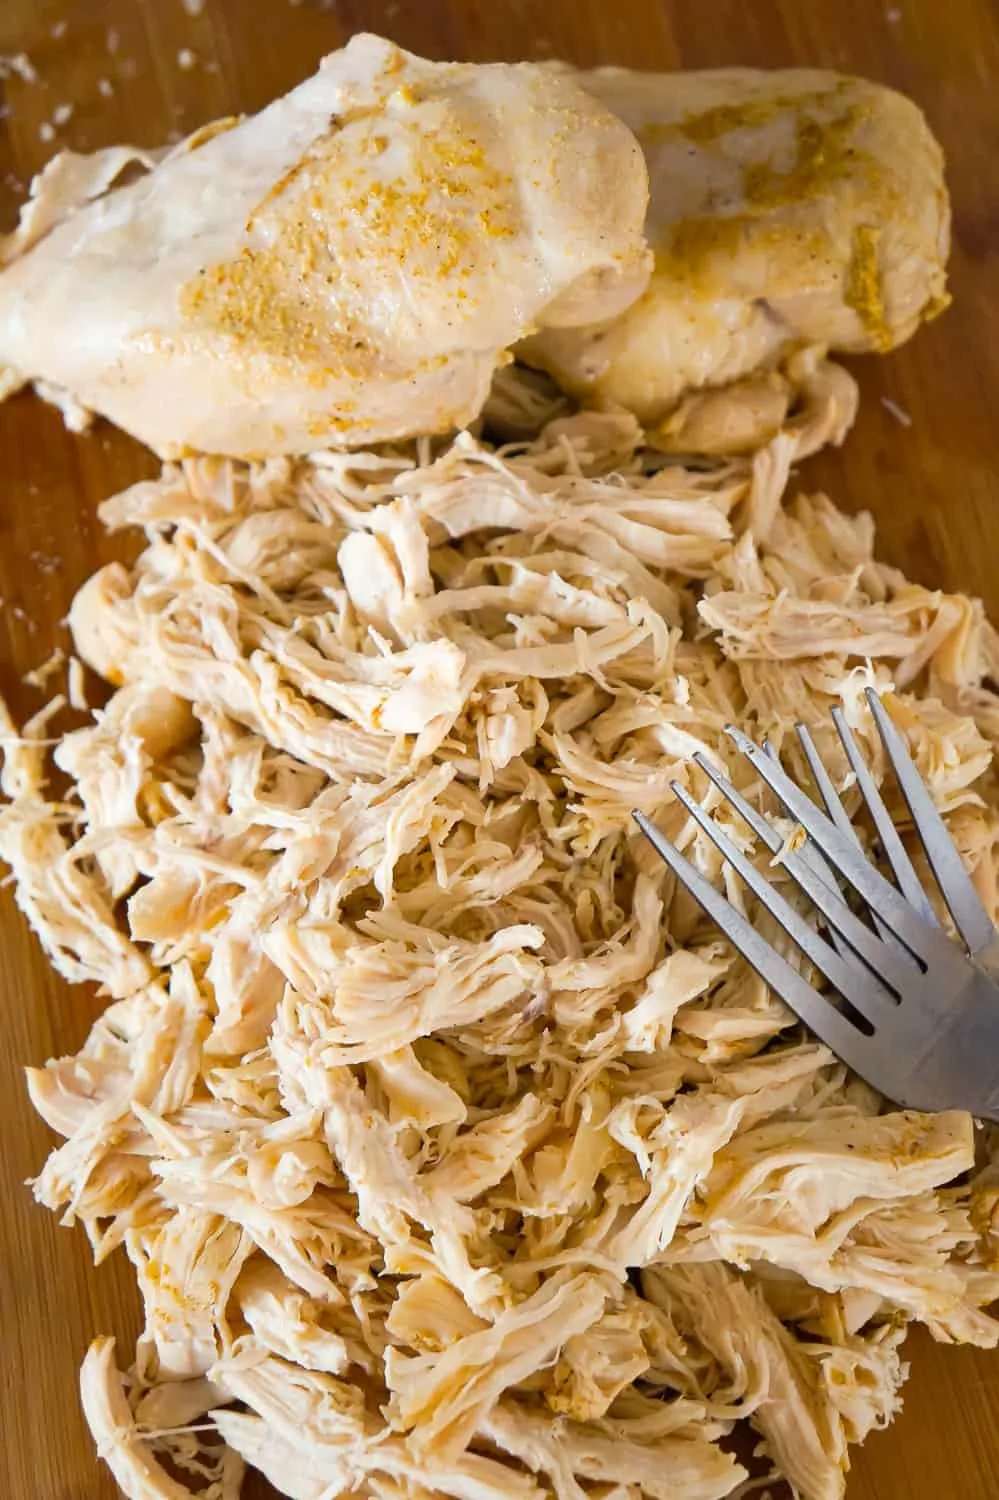 Instant Pot Shredded Chicken Breasts are perfect for using in casseroles, sandwiches, pasta dishes and more.This easy recipe produces about 6 cups of tender and delicious shredded chicken that can be used in any recipe calling for cooked and shredded chicken.Instant Pot shredded chicken can be cooked in advanced and used in multiple dinner recipes throughout the week instead of using store bought rotisserie chicken.